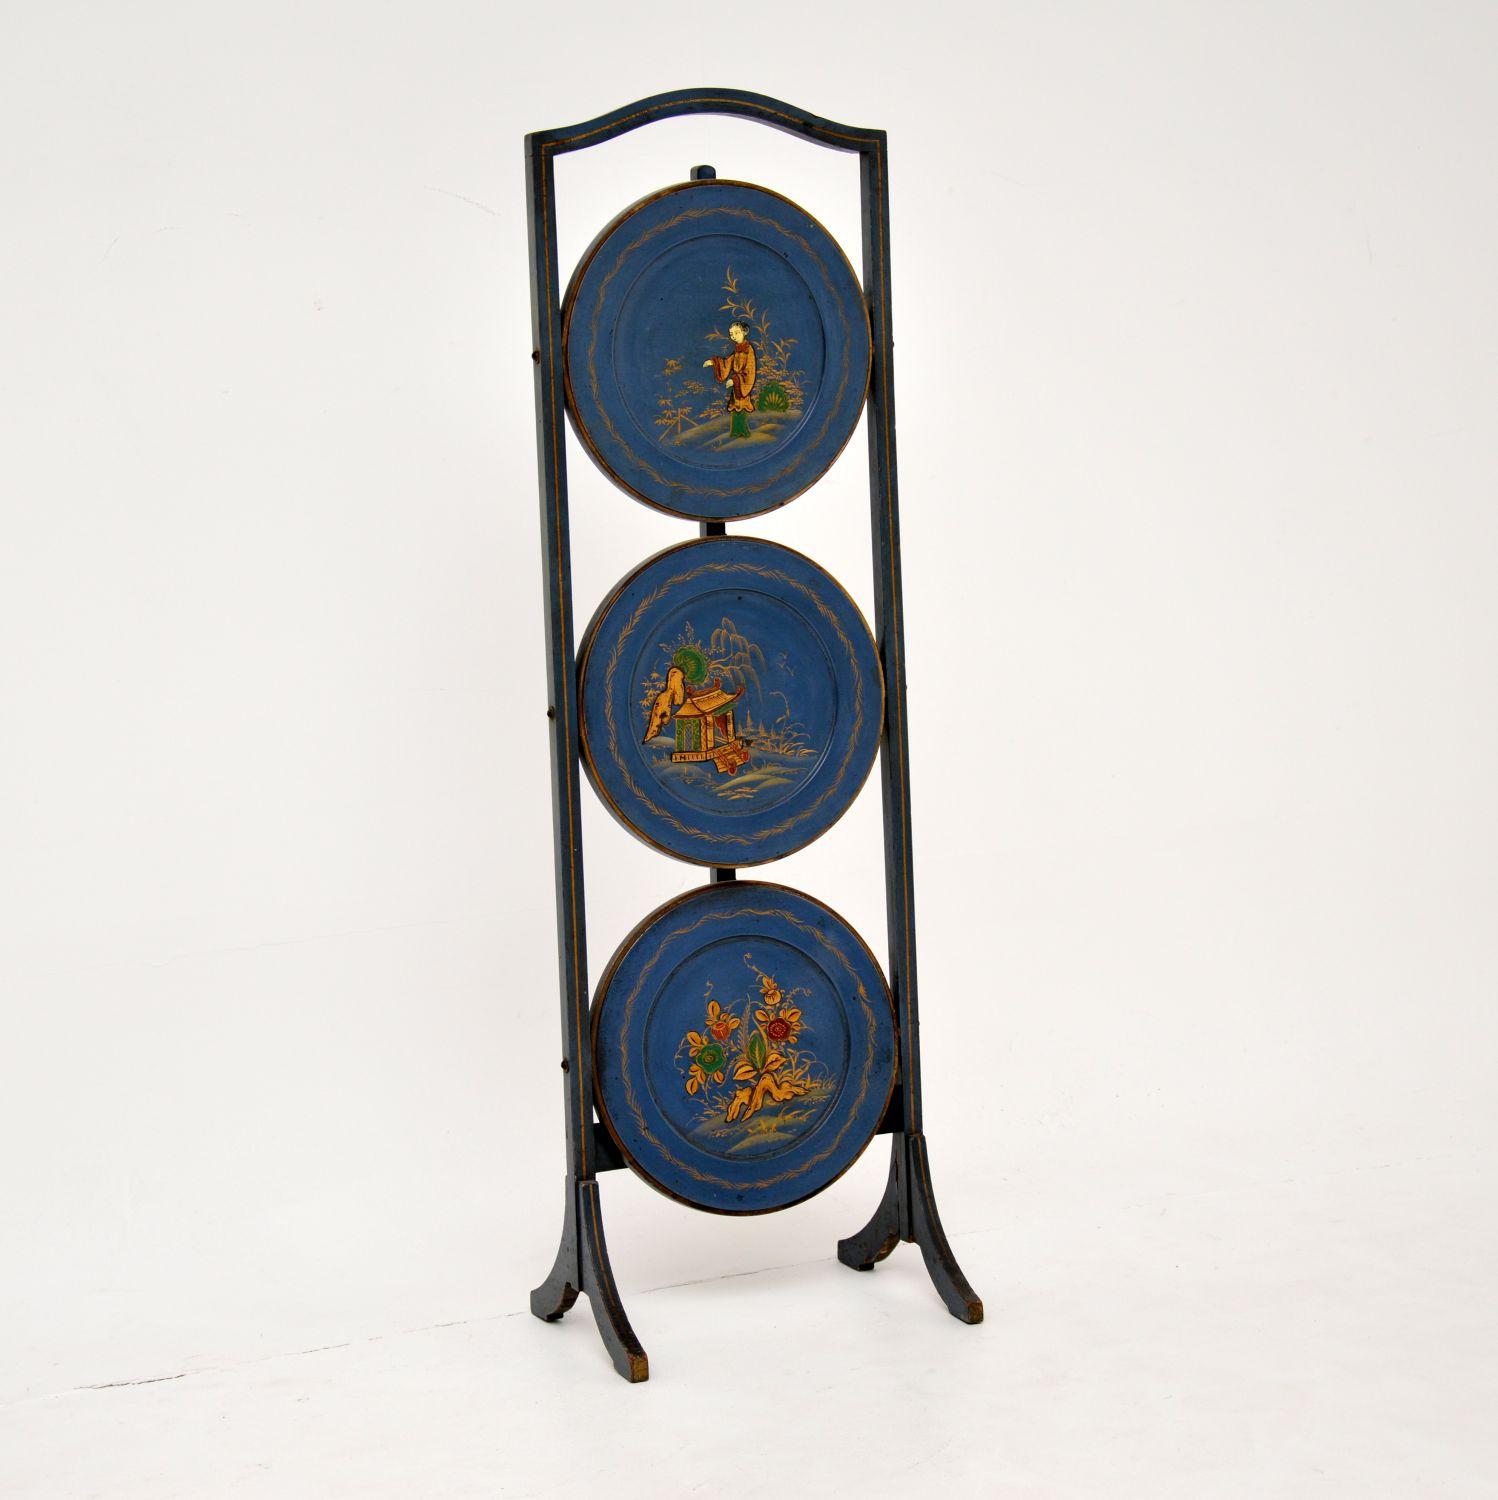 A beautiful antique Edwardian lacquered chinoiserie folding cake stand. This was made in England, it dates from around the 1900-1910 period.

It is beautifully made and exquisitely decorated in the oriental lacquered manner. The overall colour is